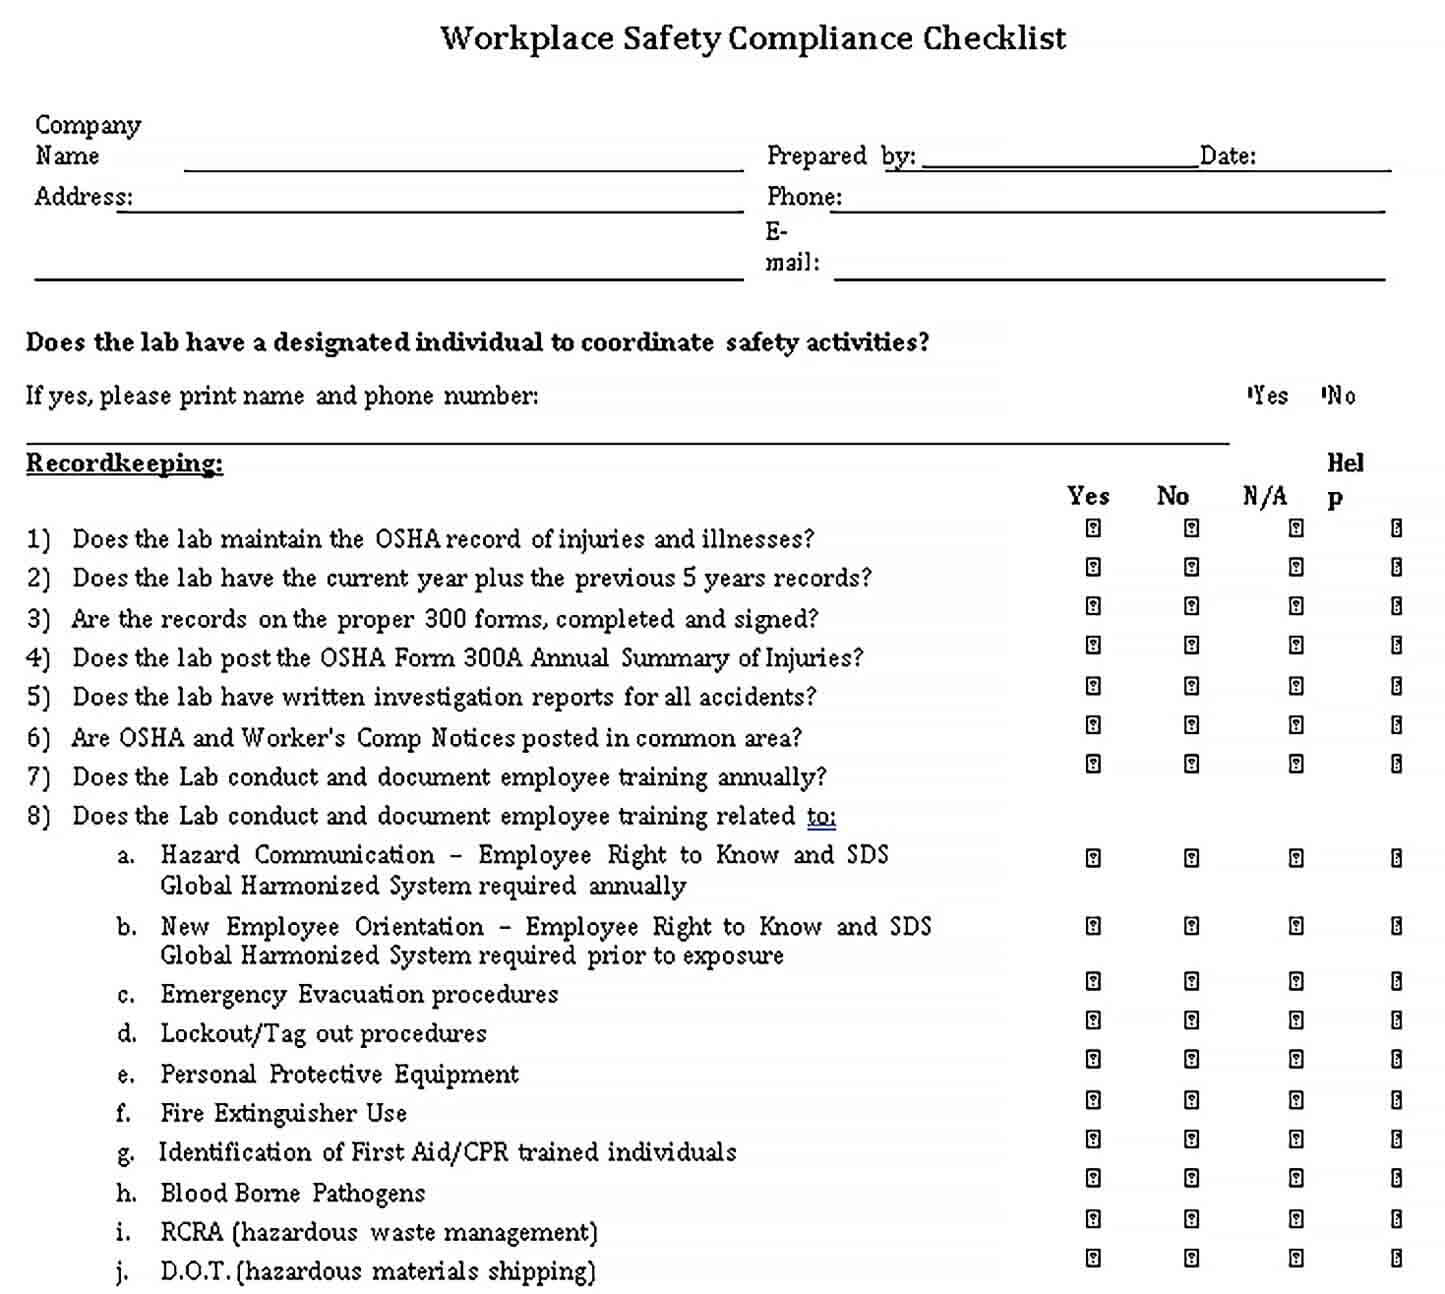 Sample Workplace Safety Compliance Checklist